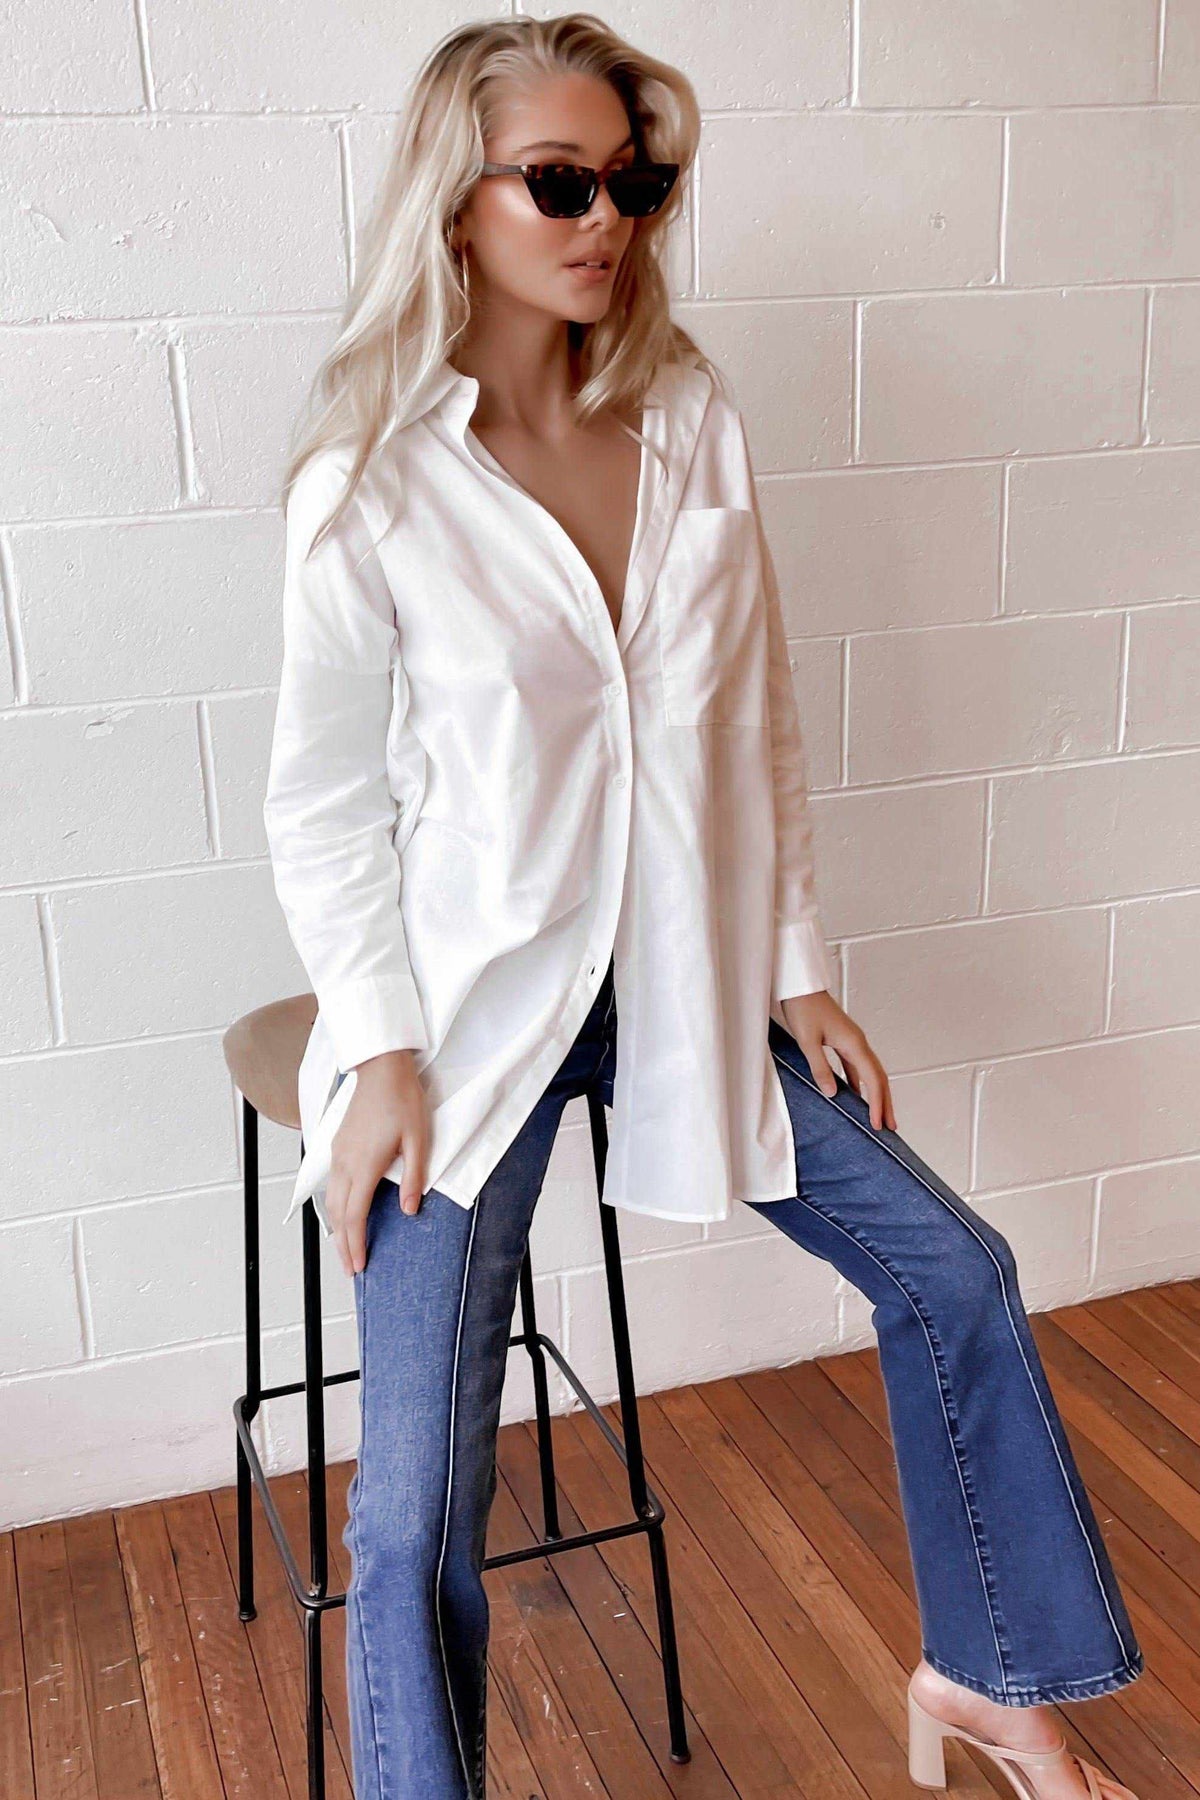 Varlita Top, COTTON, LONG SLEEVE, TOP, TOPS, WHITE, Our New Varlita Top Is Now Only $61.00 Exclusive At Mishkah, Our New Varlita Top is now only $61.00-We Have The Latest Women&#39;s Tops @ Mishkah Online Fashion Boutique-MISHKAH